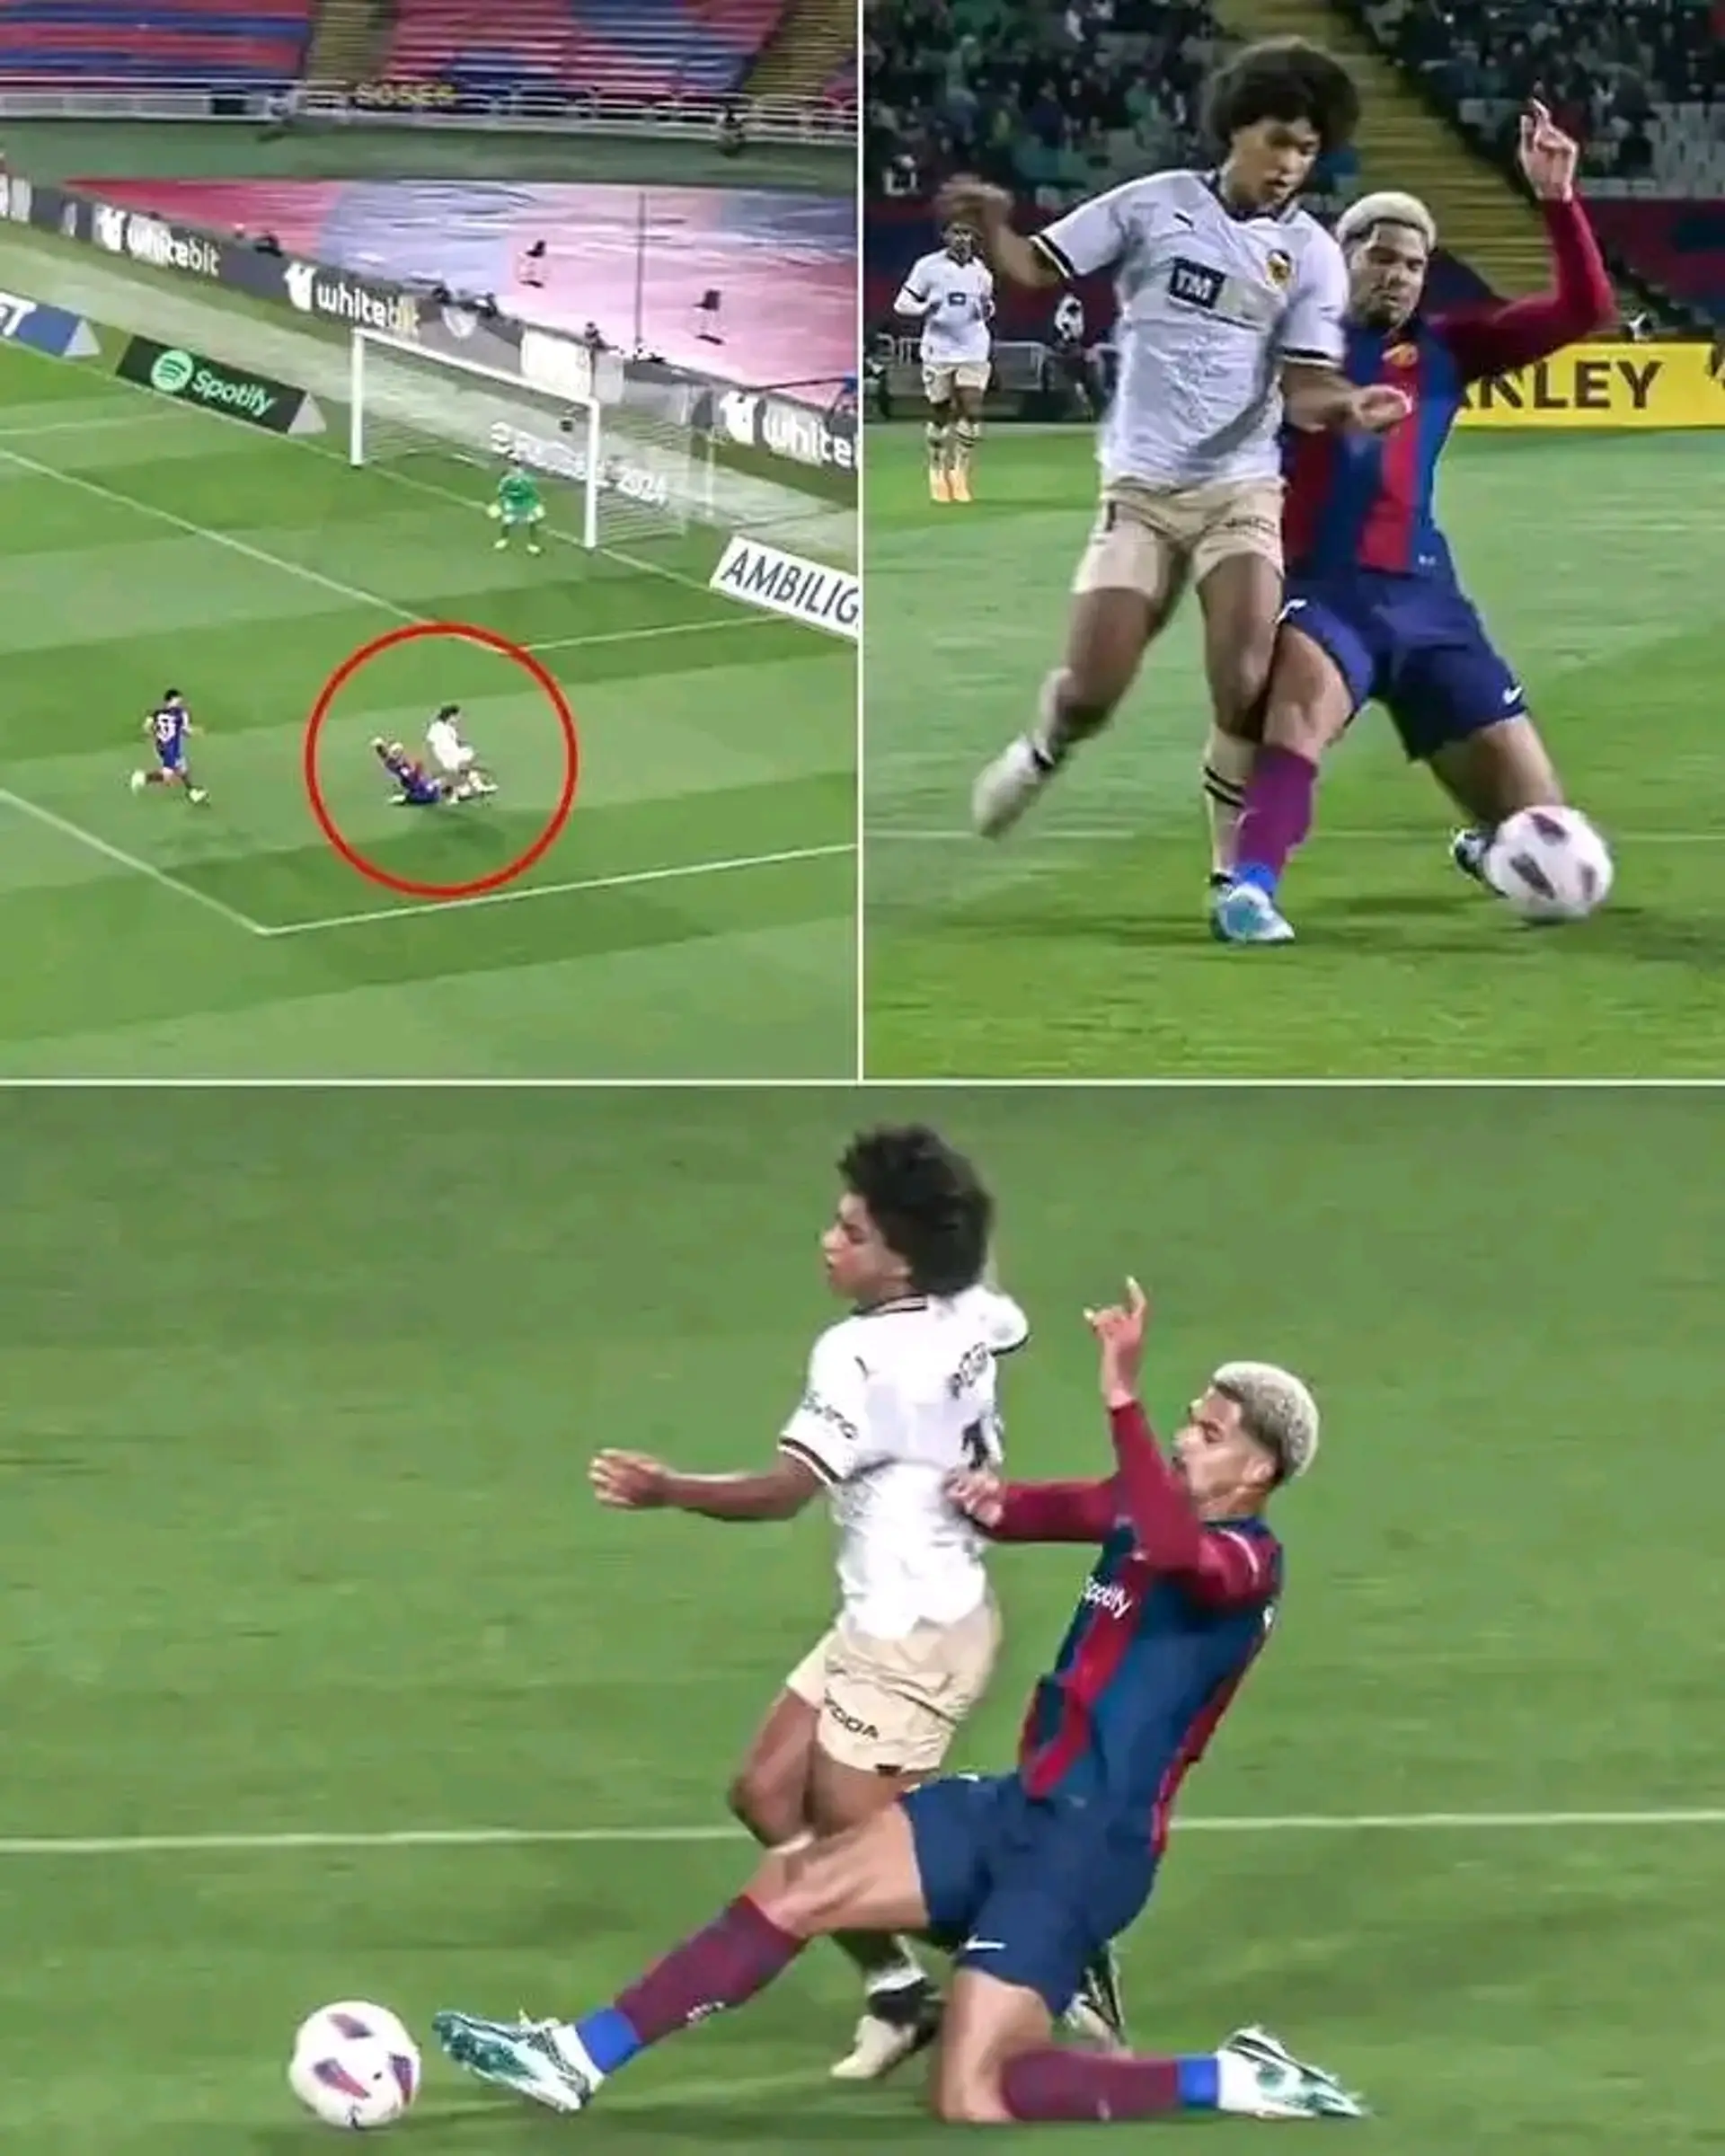 The tackle was not necessary. Xavi have to make serious discussion with Aroujo to see if he still love 😘 to play for the club.